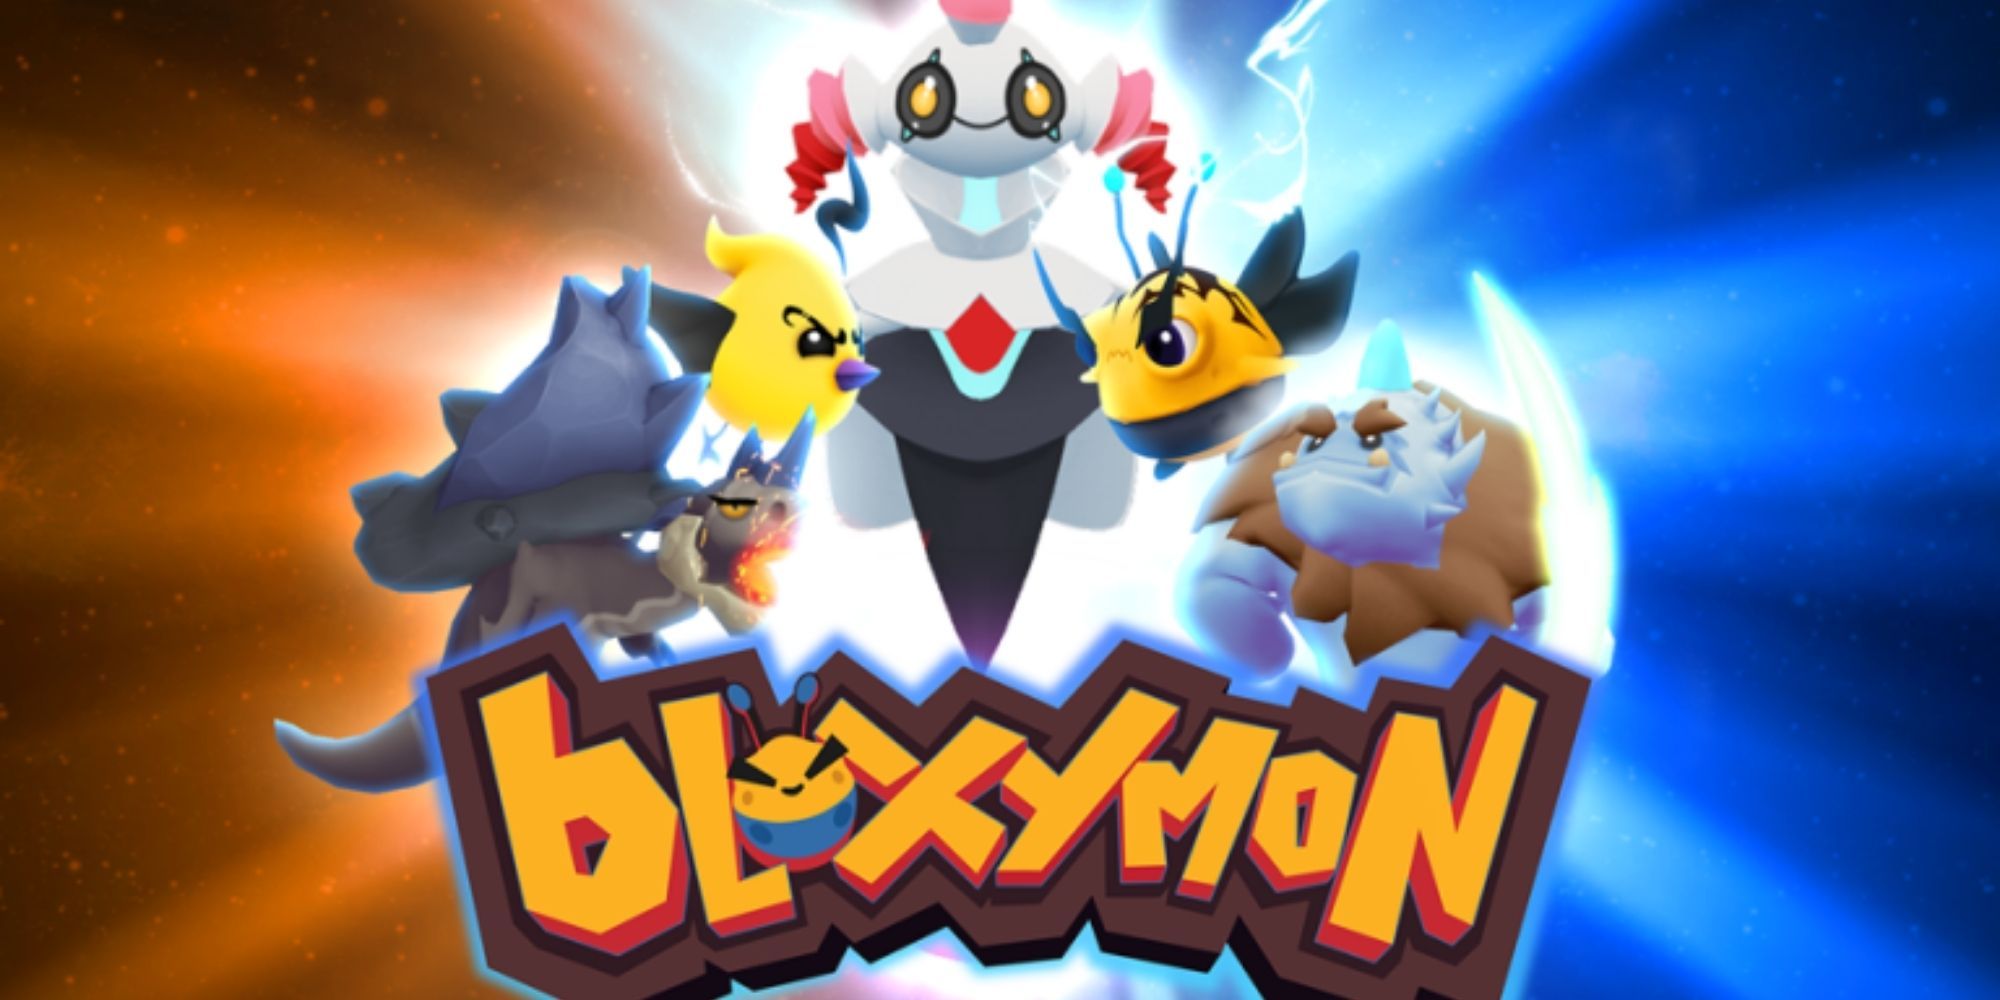 Image still of Bloxymons from Roblox game Bloxymon.